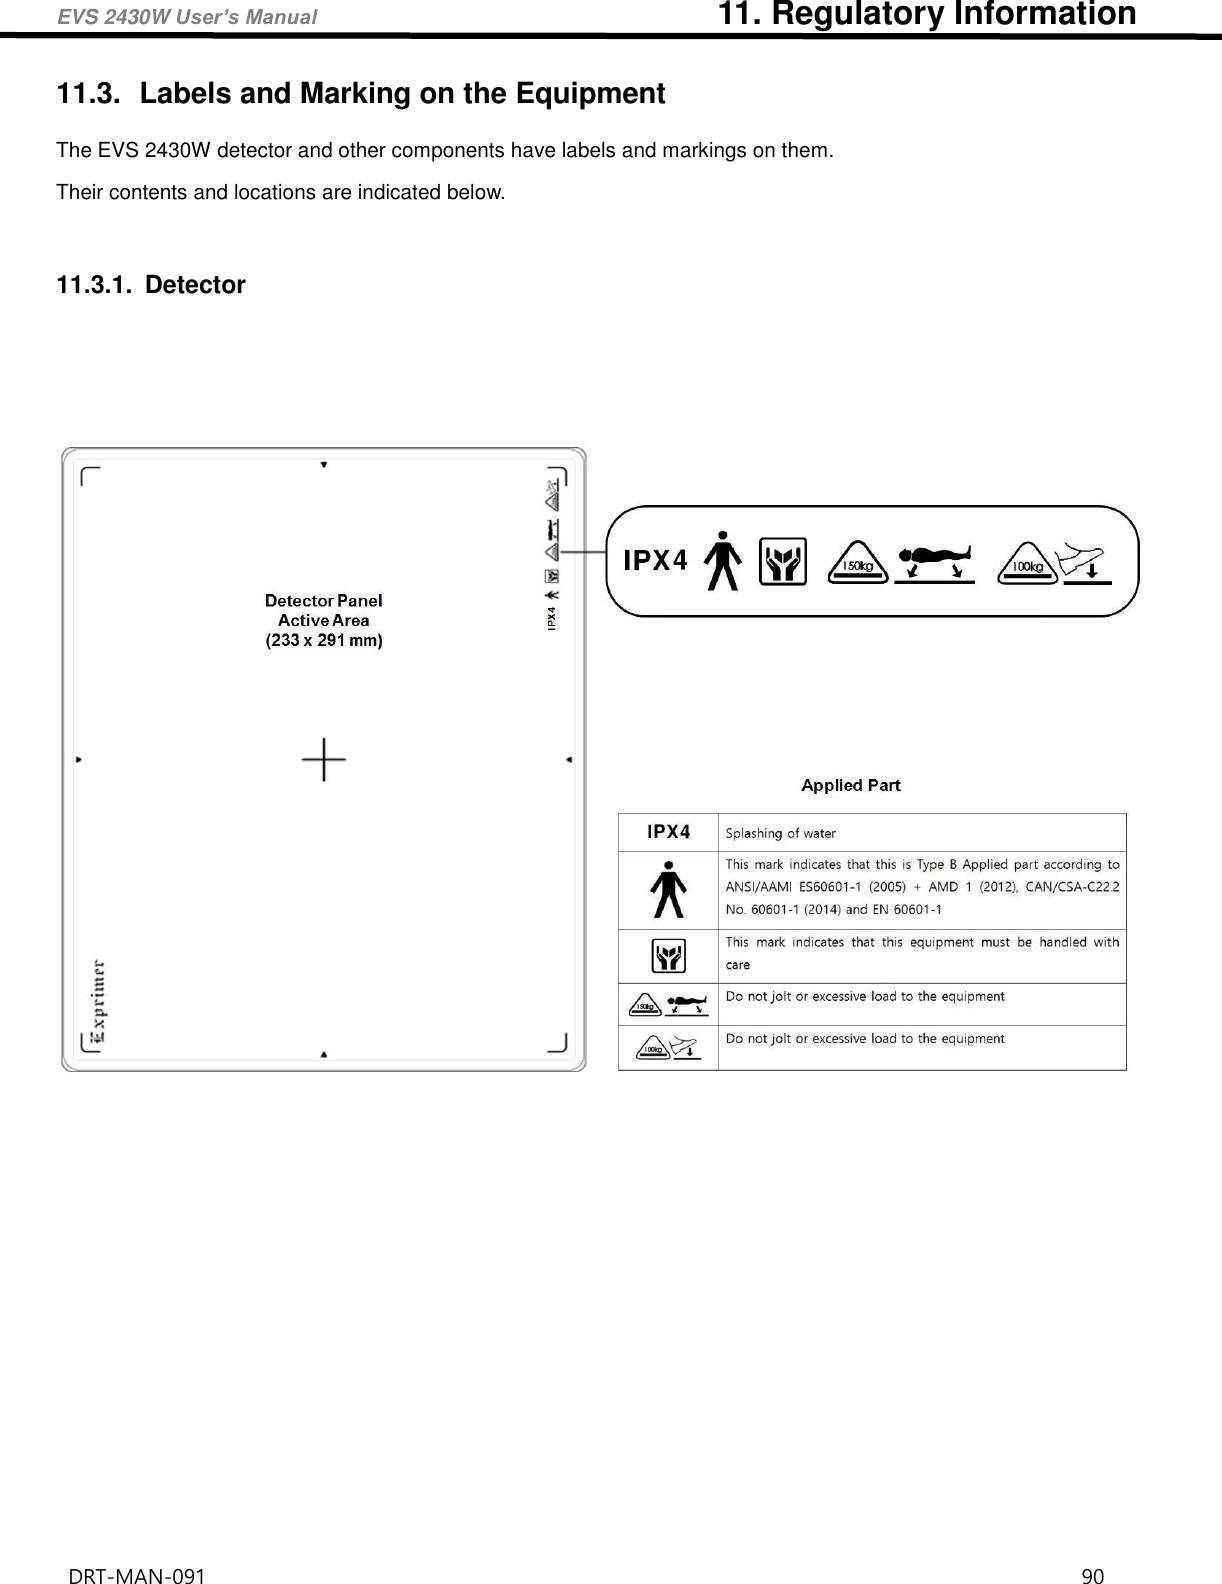 EVS 2430W User’s Manual                                                11. Regulatory Information DRT-MAN-091                                                                                    90   11.3.  Labels and Marking on the Equipment The EVS 2430W detector and other components have labels and markings on them. Their contents and locations are indicated below.     11.3.1.  Detector          